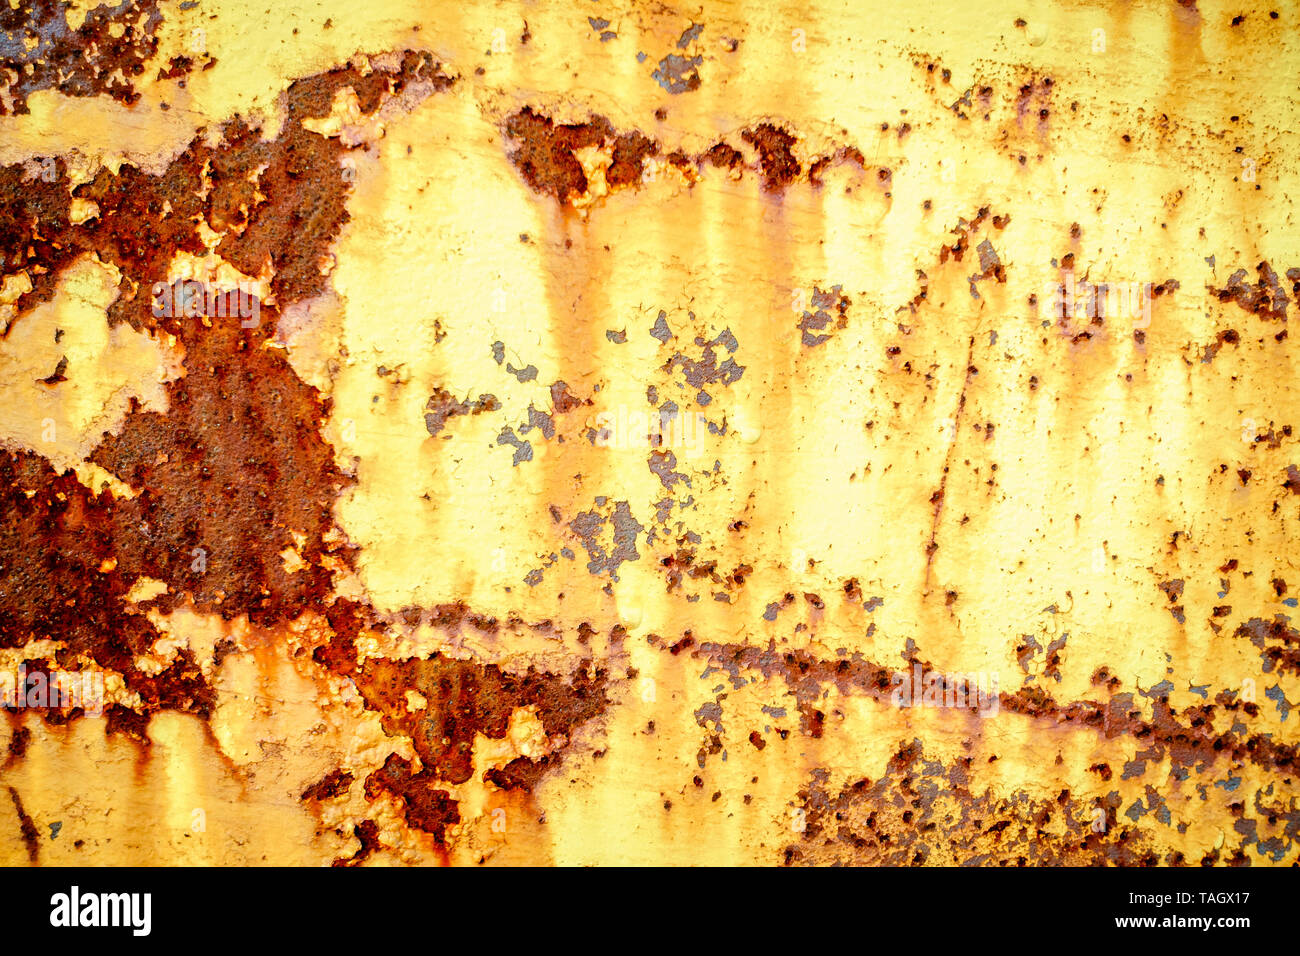 Close-up image of rusted metal surface with remnants of yellow paint Stock Photo